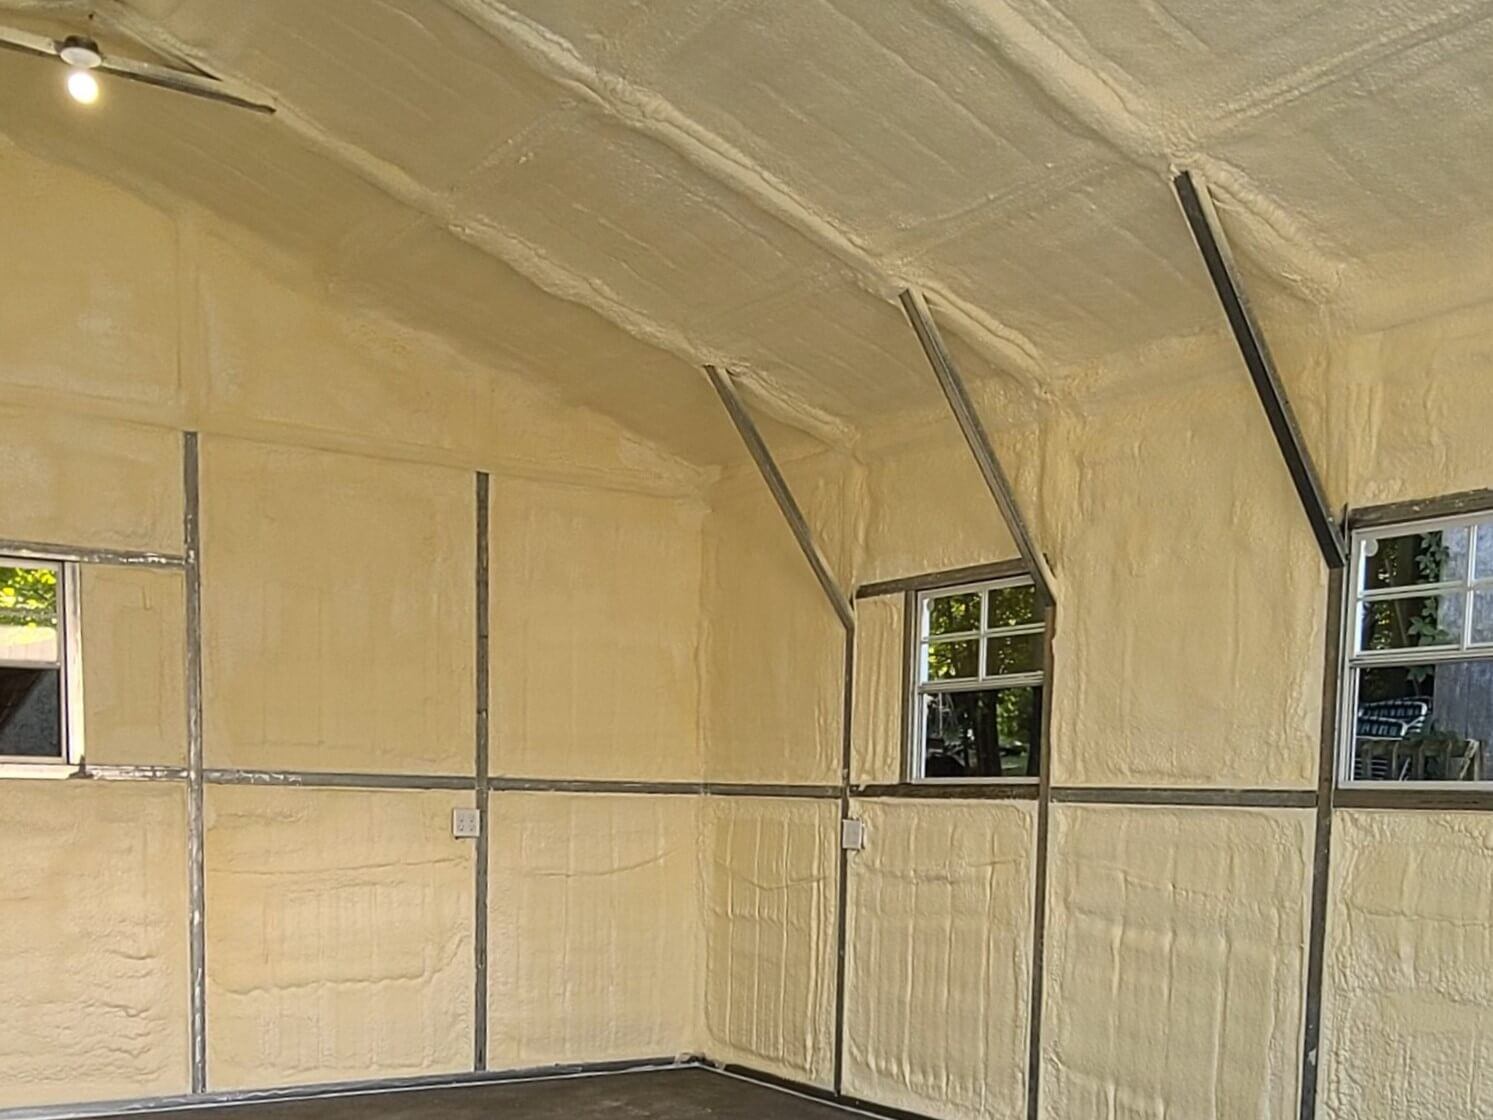 A metal building insulated with closed cell spray foam insulation. The walls and roof have been sprayed with closed cell foam.